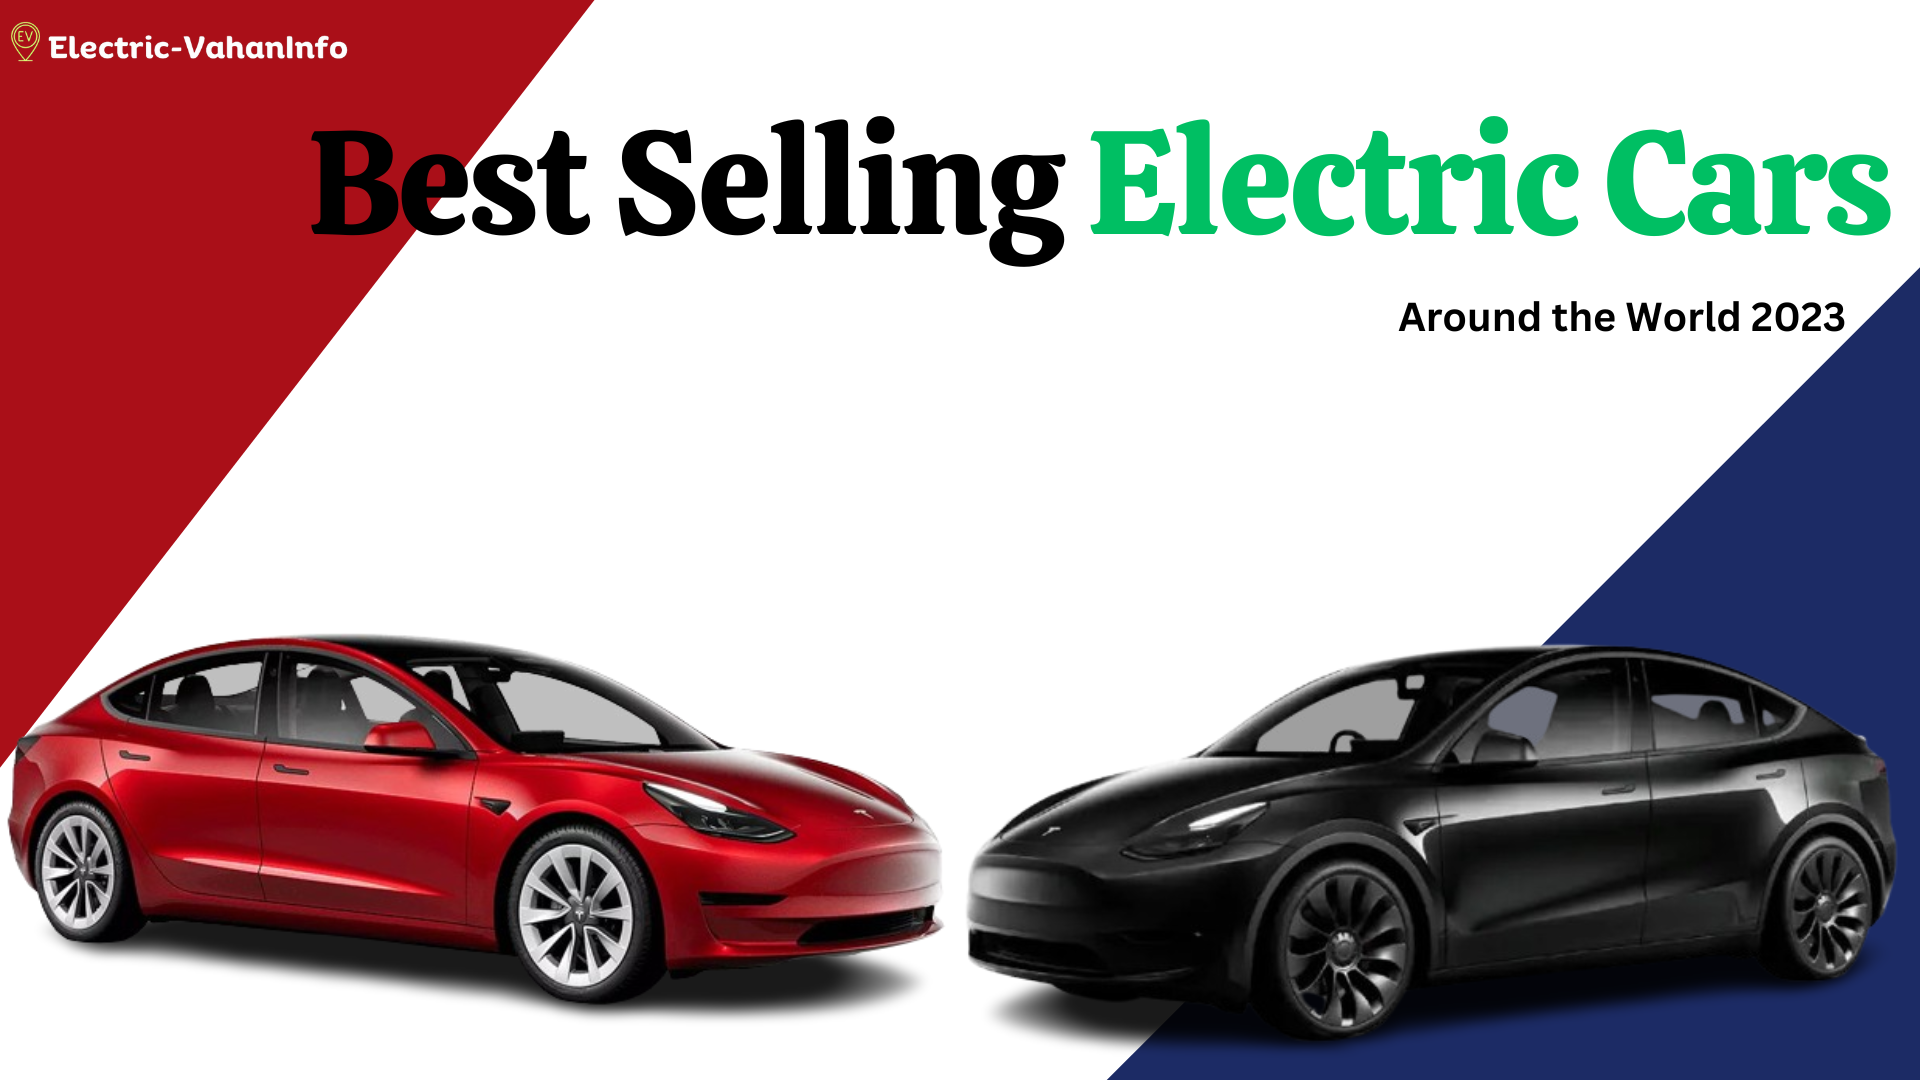 https://electric-vahaninfo.com/top-10-best-selling-electric-cars-in-2023-around-the-world/